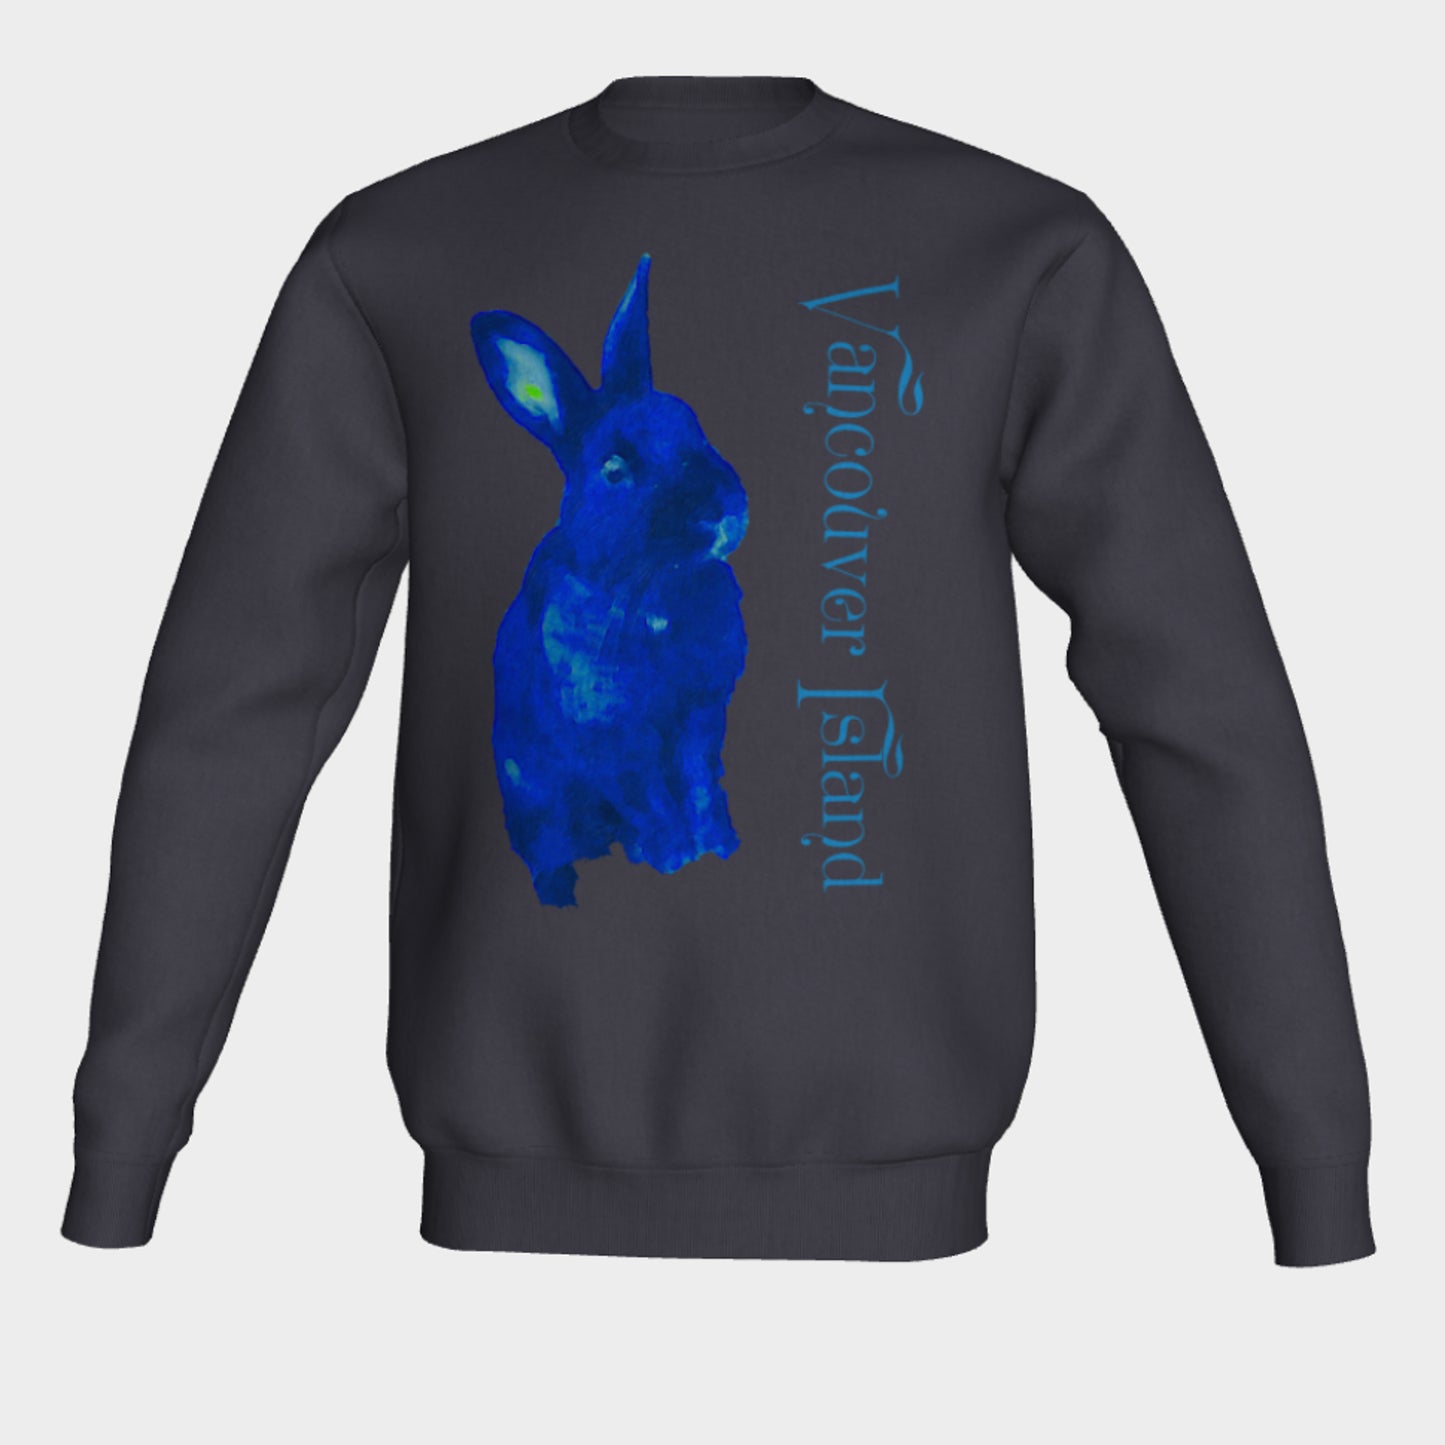 Bunny Love Vancouver Island Unisex Crewneck Sweatshirt What’s better than a super cozy sweatshirt? A super cozy sweatshirt from Van Isle Goddess!  Super cozy unisex sweatshirt for those chilly days.  Excellent for men or women.   Fit is roomy and comfortable. 